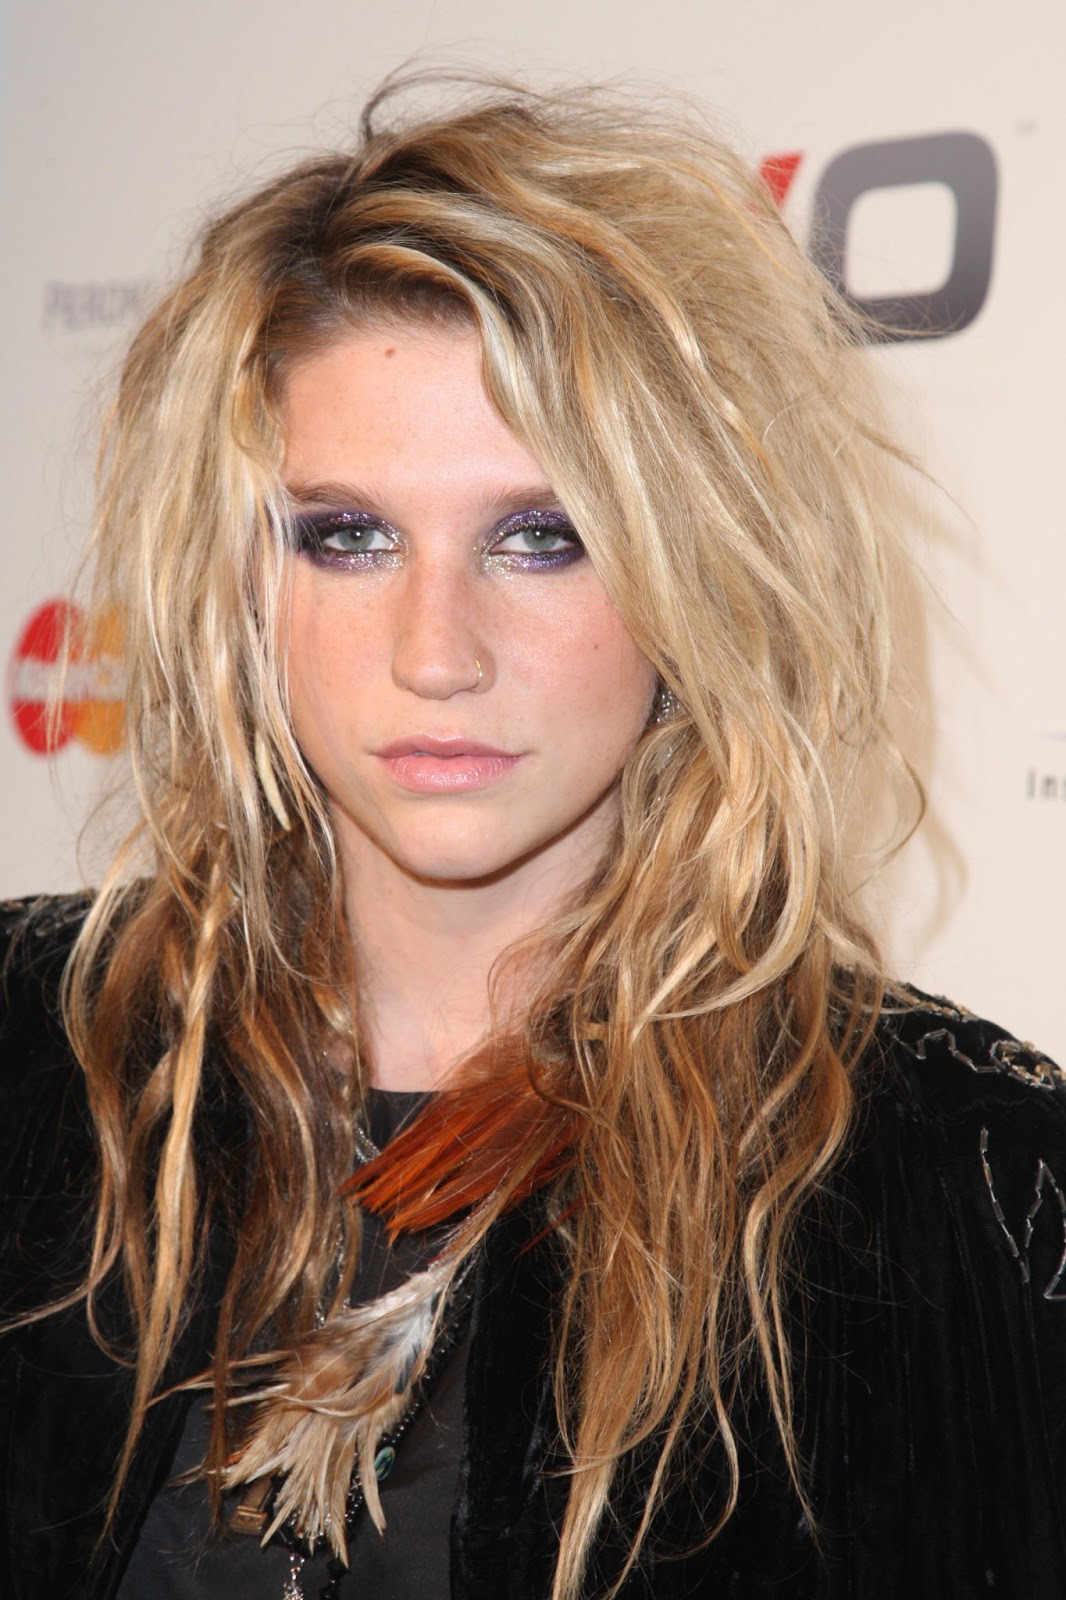 Kesha HD Wallpaper Check Out The Cool